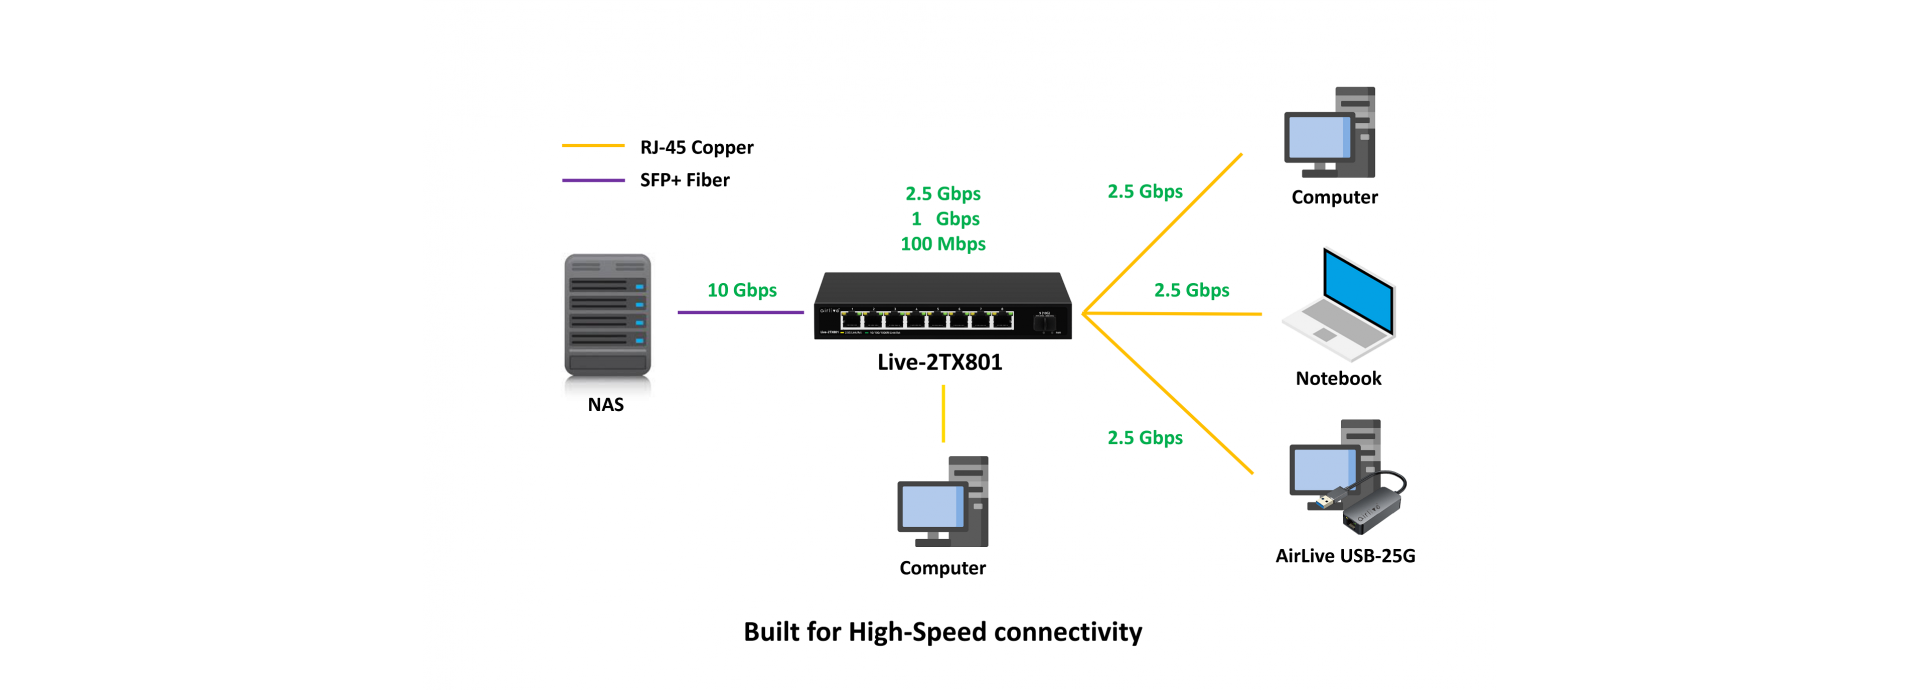 Painless Upgrading your Network Connection to 2.5Gbps & SFP+ 10G Super High speed